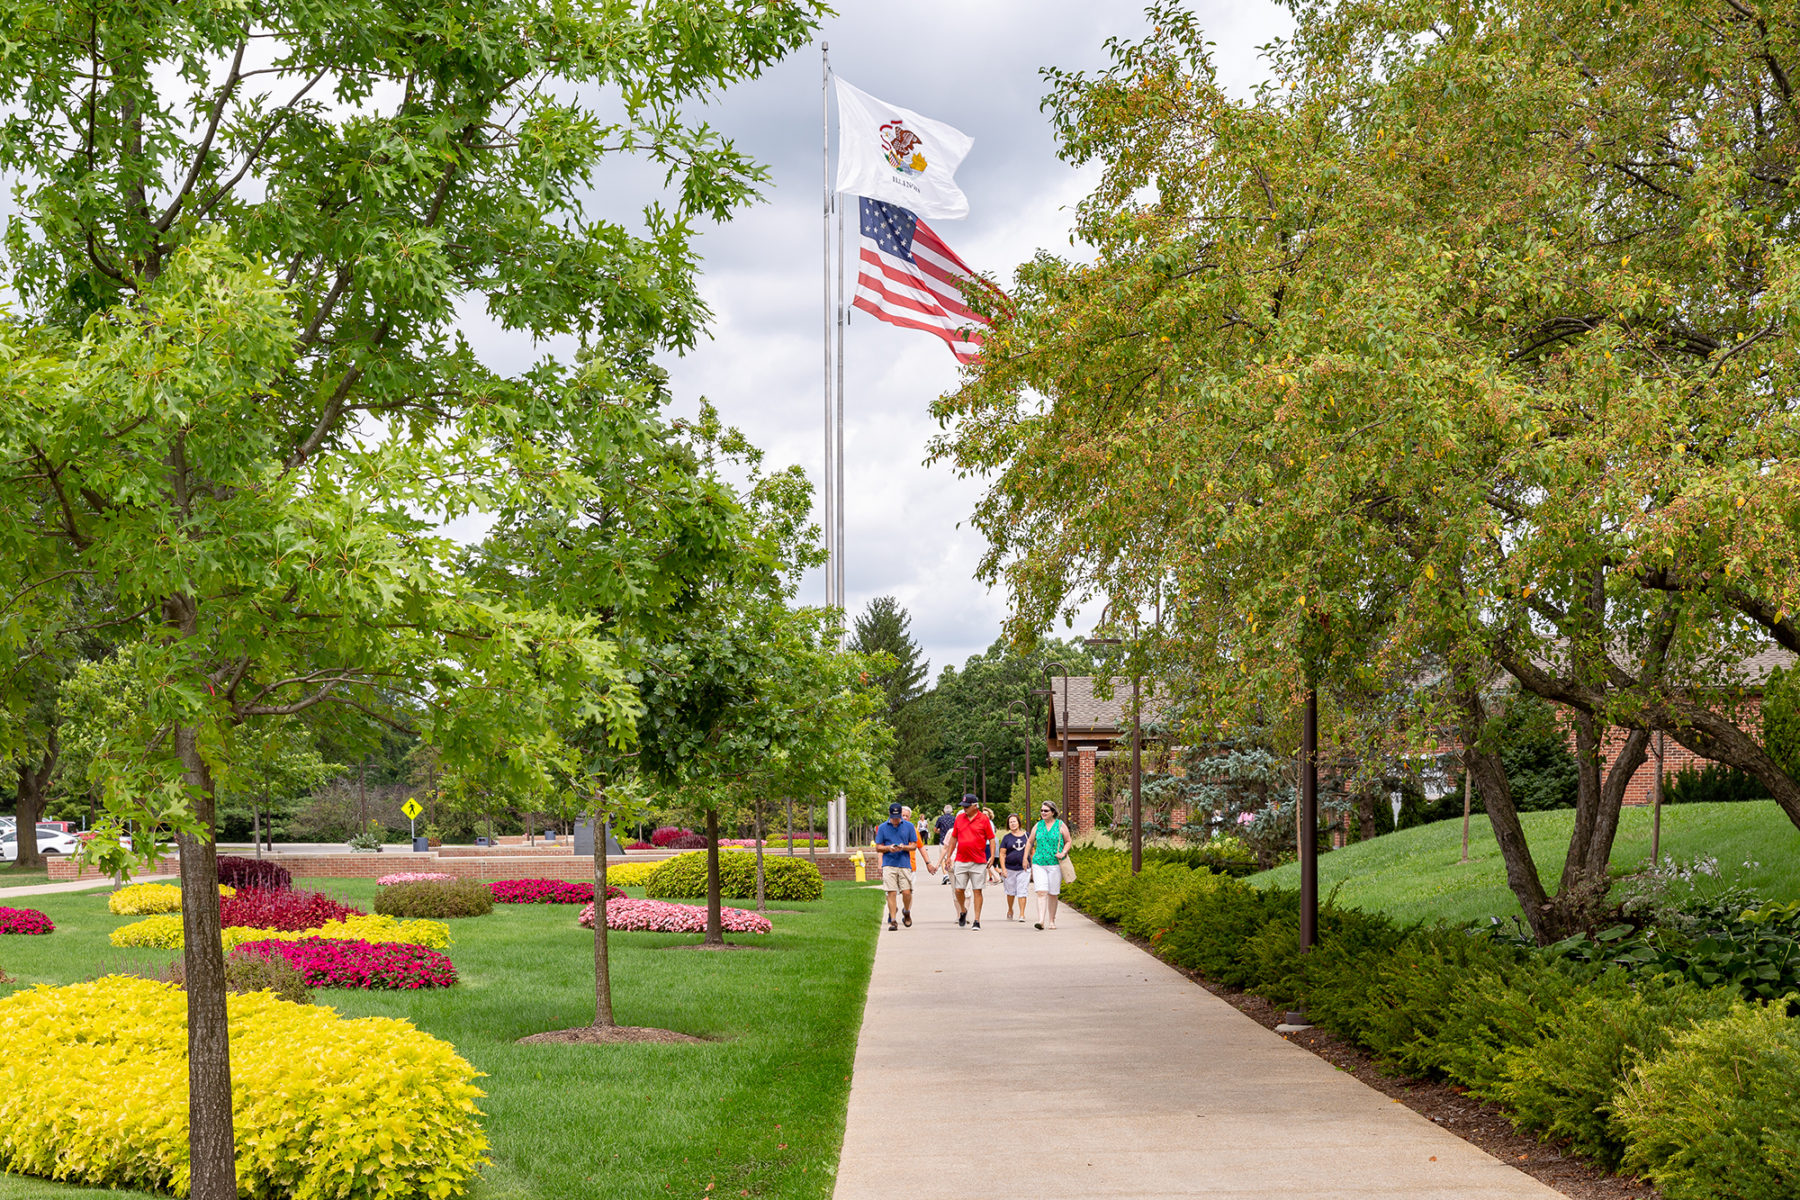 people walk down a paved pathway with an american flag in background